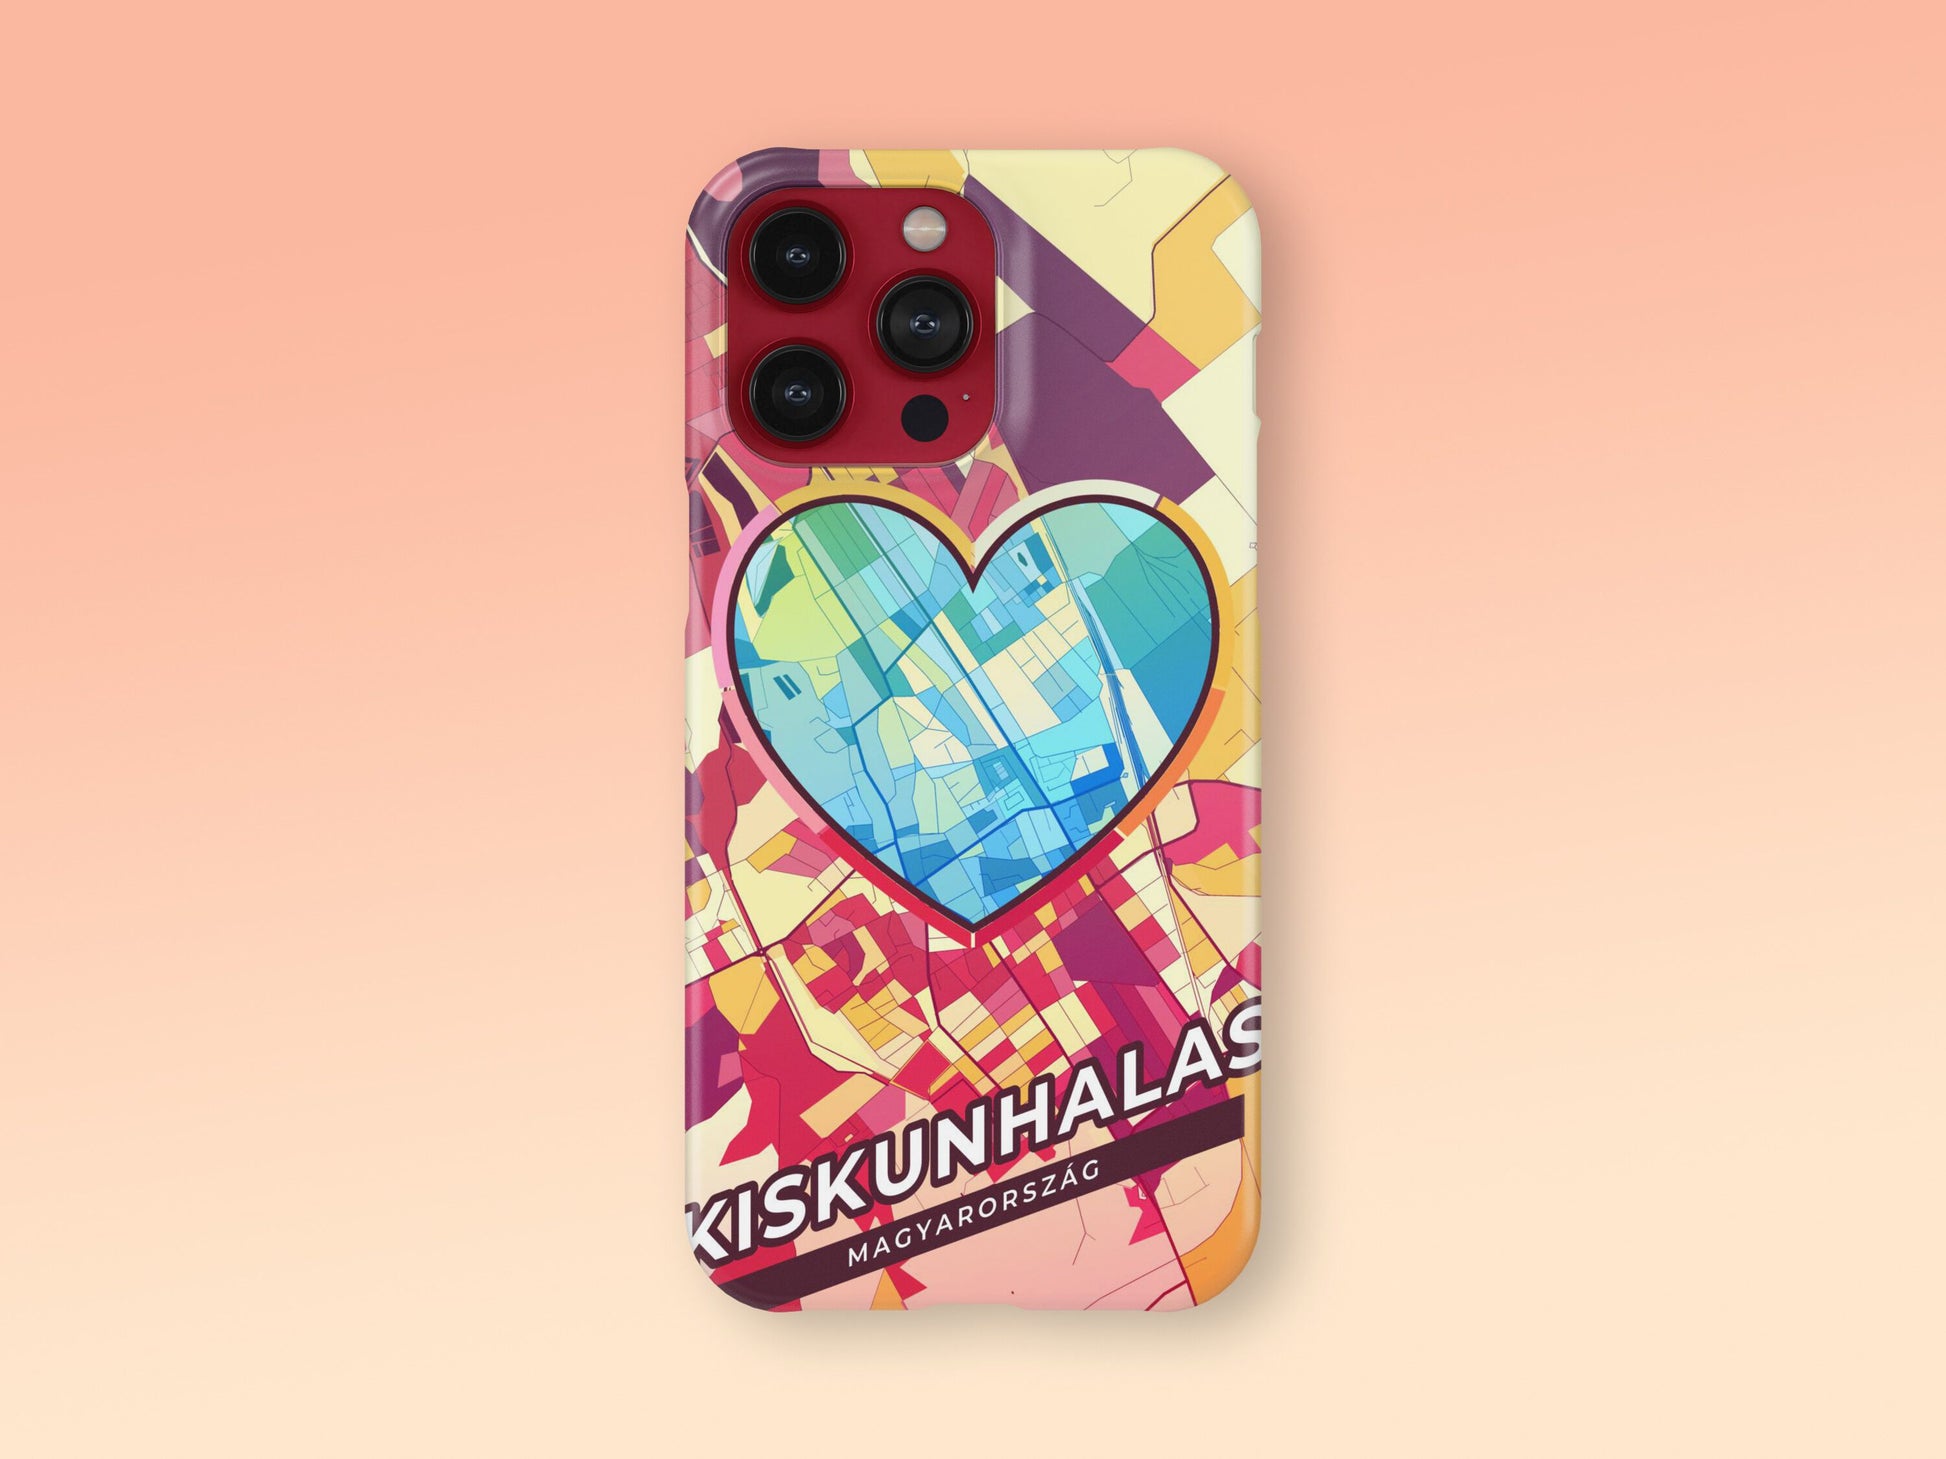 Kiskunhalas Hungary slim phone case with colorful icon. Birthday, wedding or housewarming gift. Couple match cases. 2